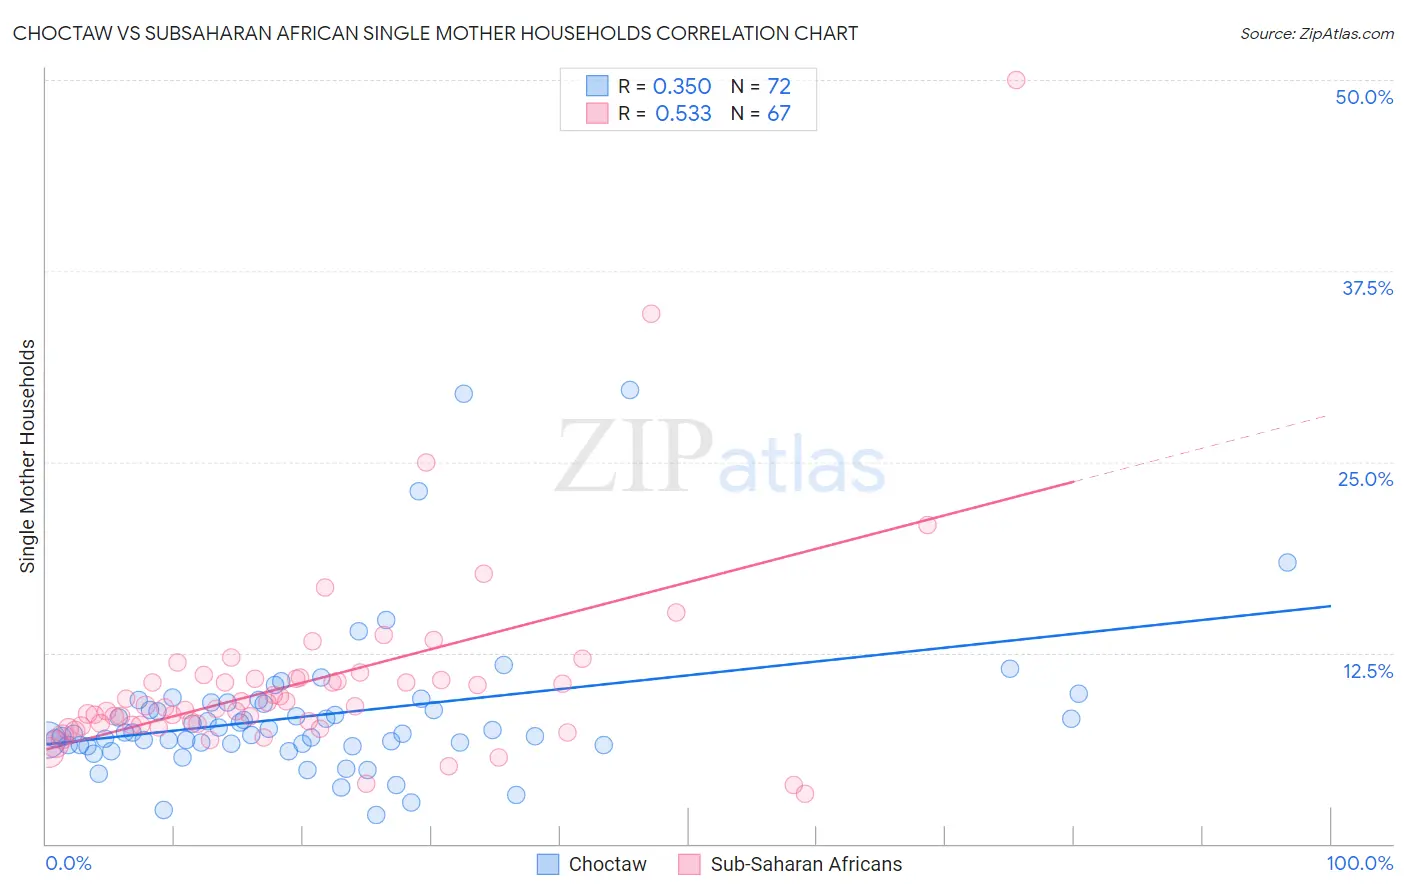 Choctaw vs Subsaharan African Single Mother Households